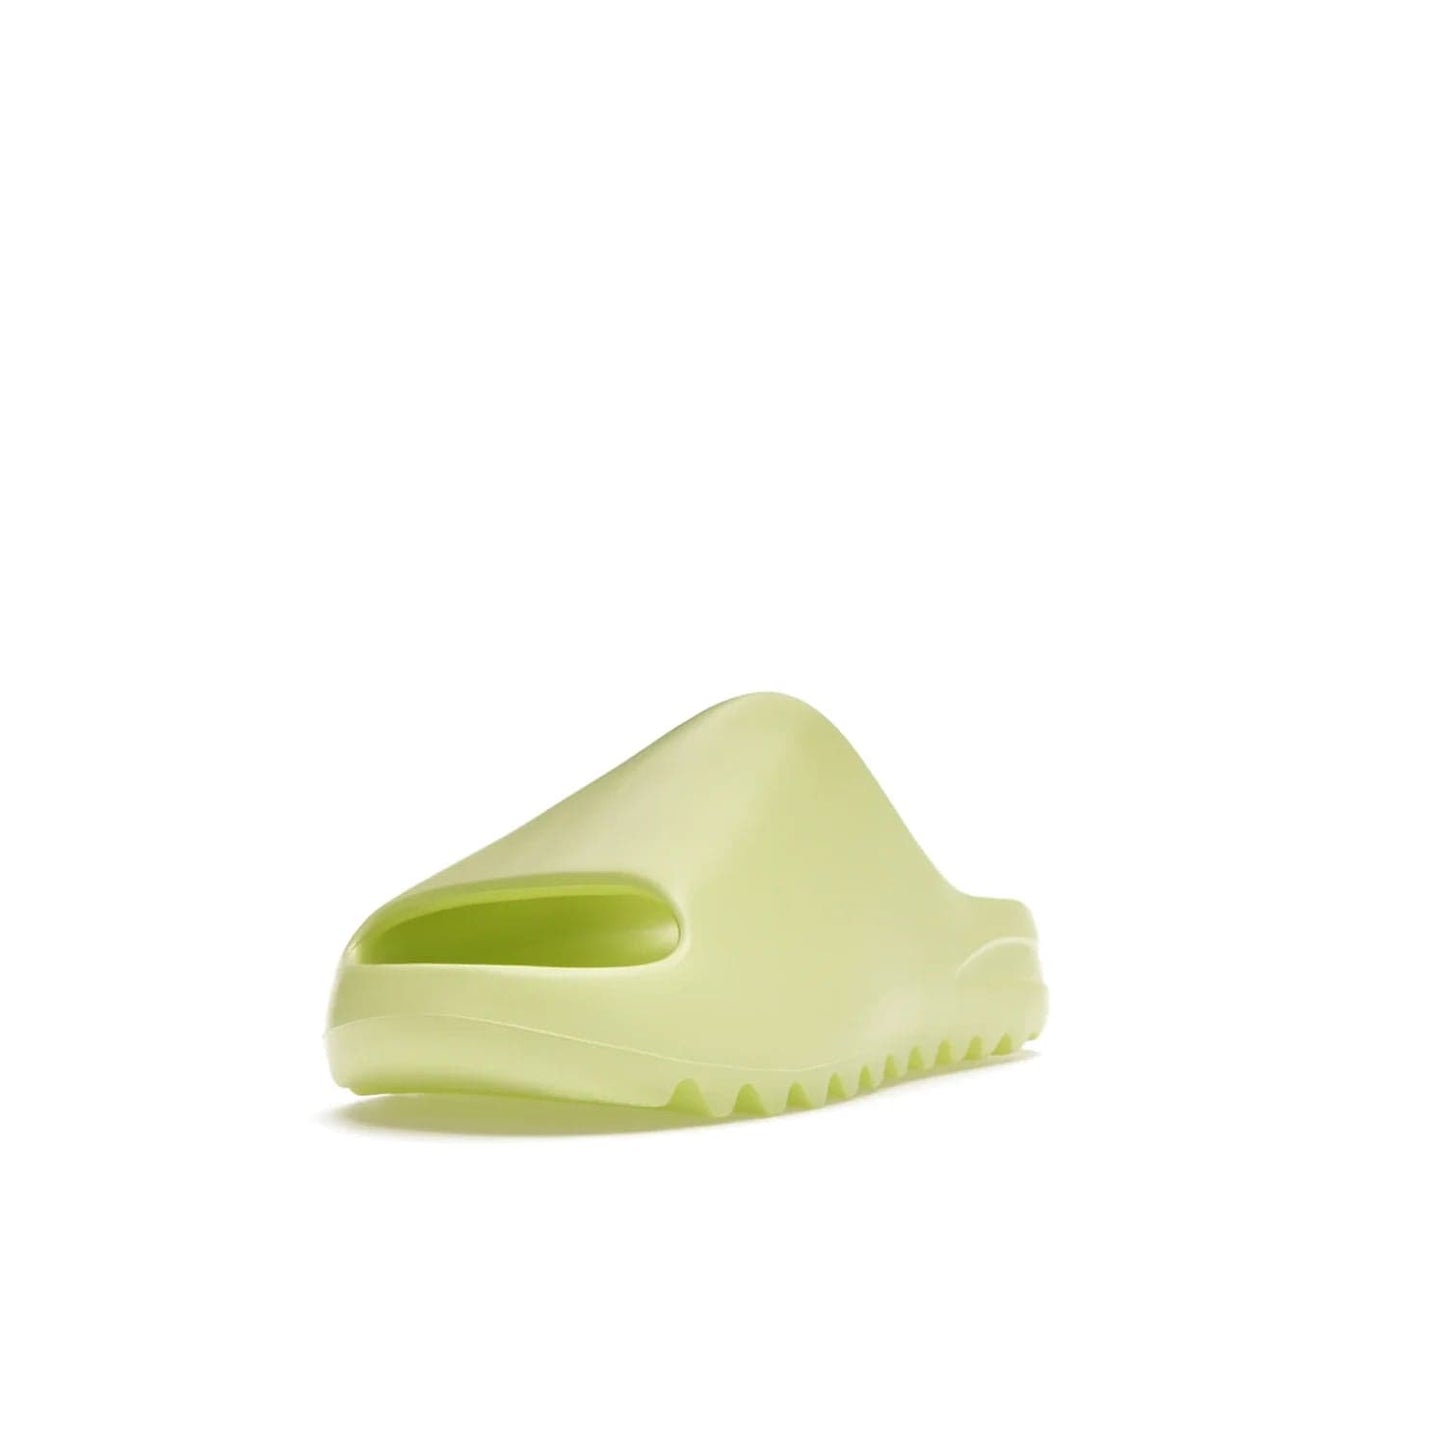 adidas Yeezy Slide Glow Green - Image 13 - Only at www.BallersClubKickz.com - Experience an unexpected summer style with the adidas Yeezy Slide Glow Green. This limited edition slide sandal provides a lightweight and durable construction and a bold Glow Green hue. Strategic grooves enhance traction and provide all-day comfort. Make a statement with the adidas Yeezy Slide Glow Green.